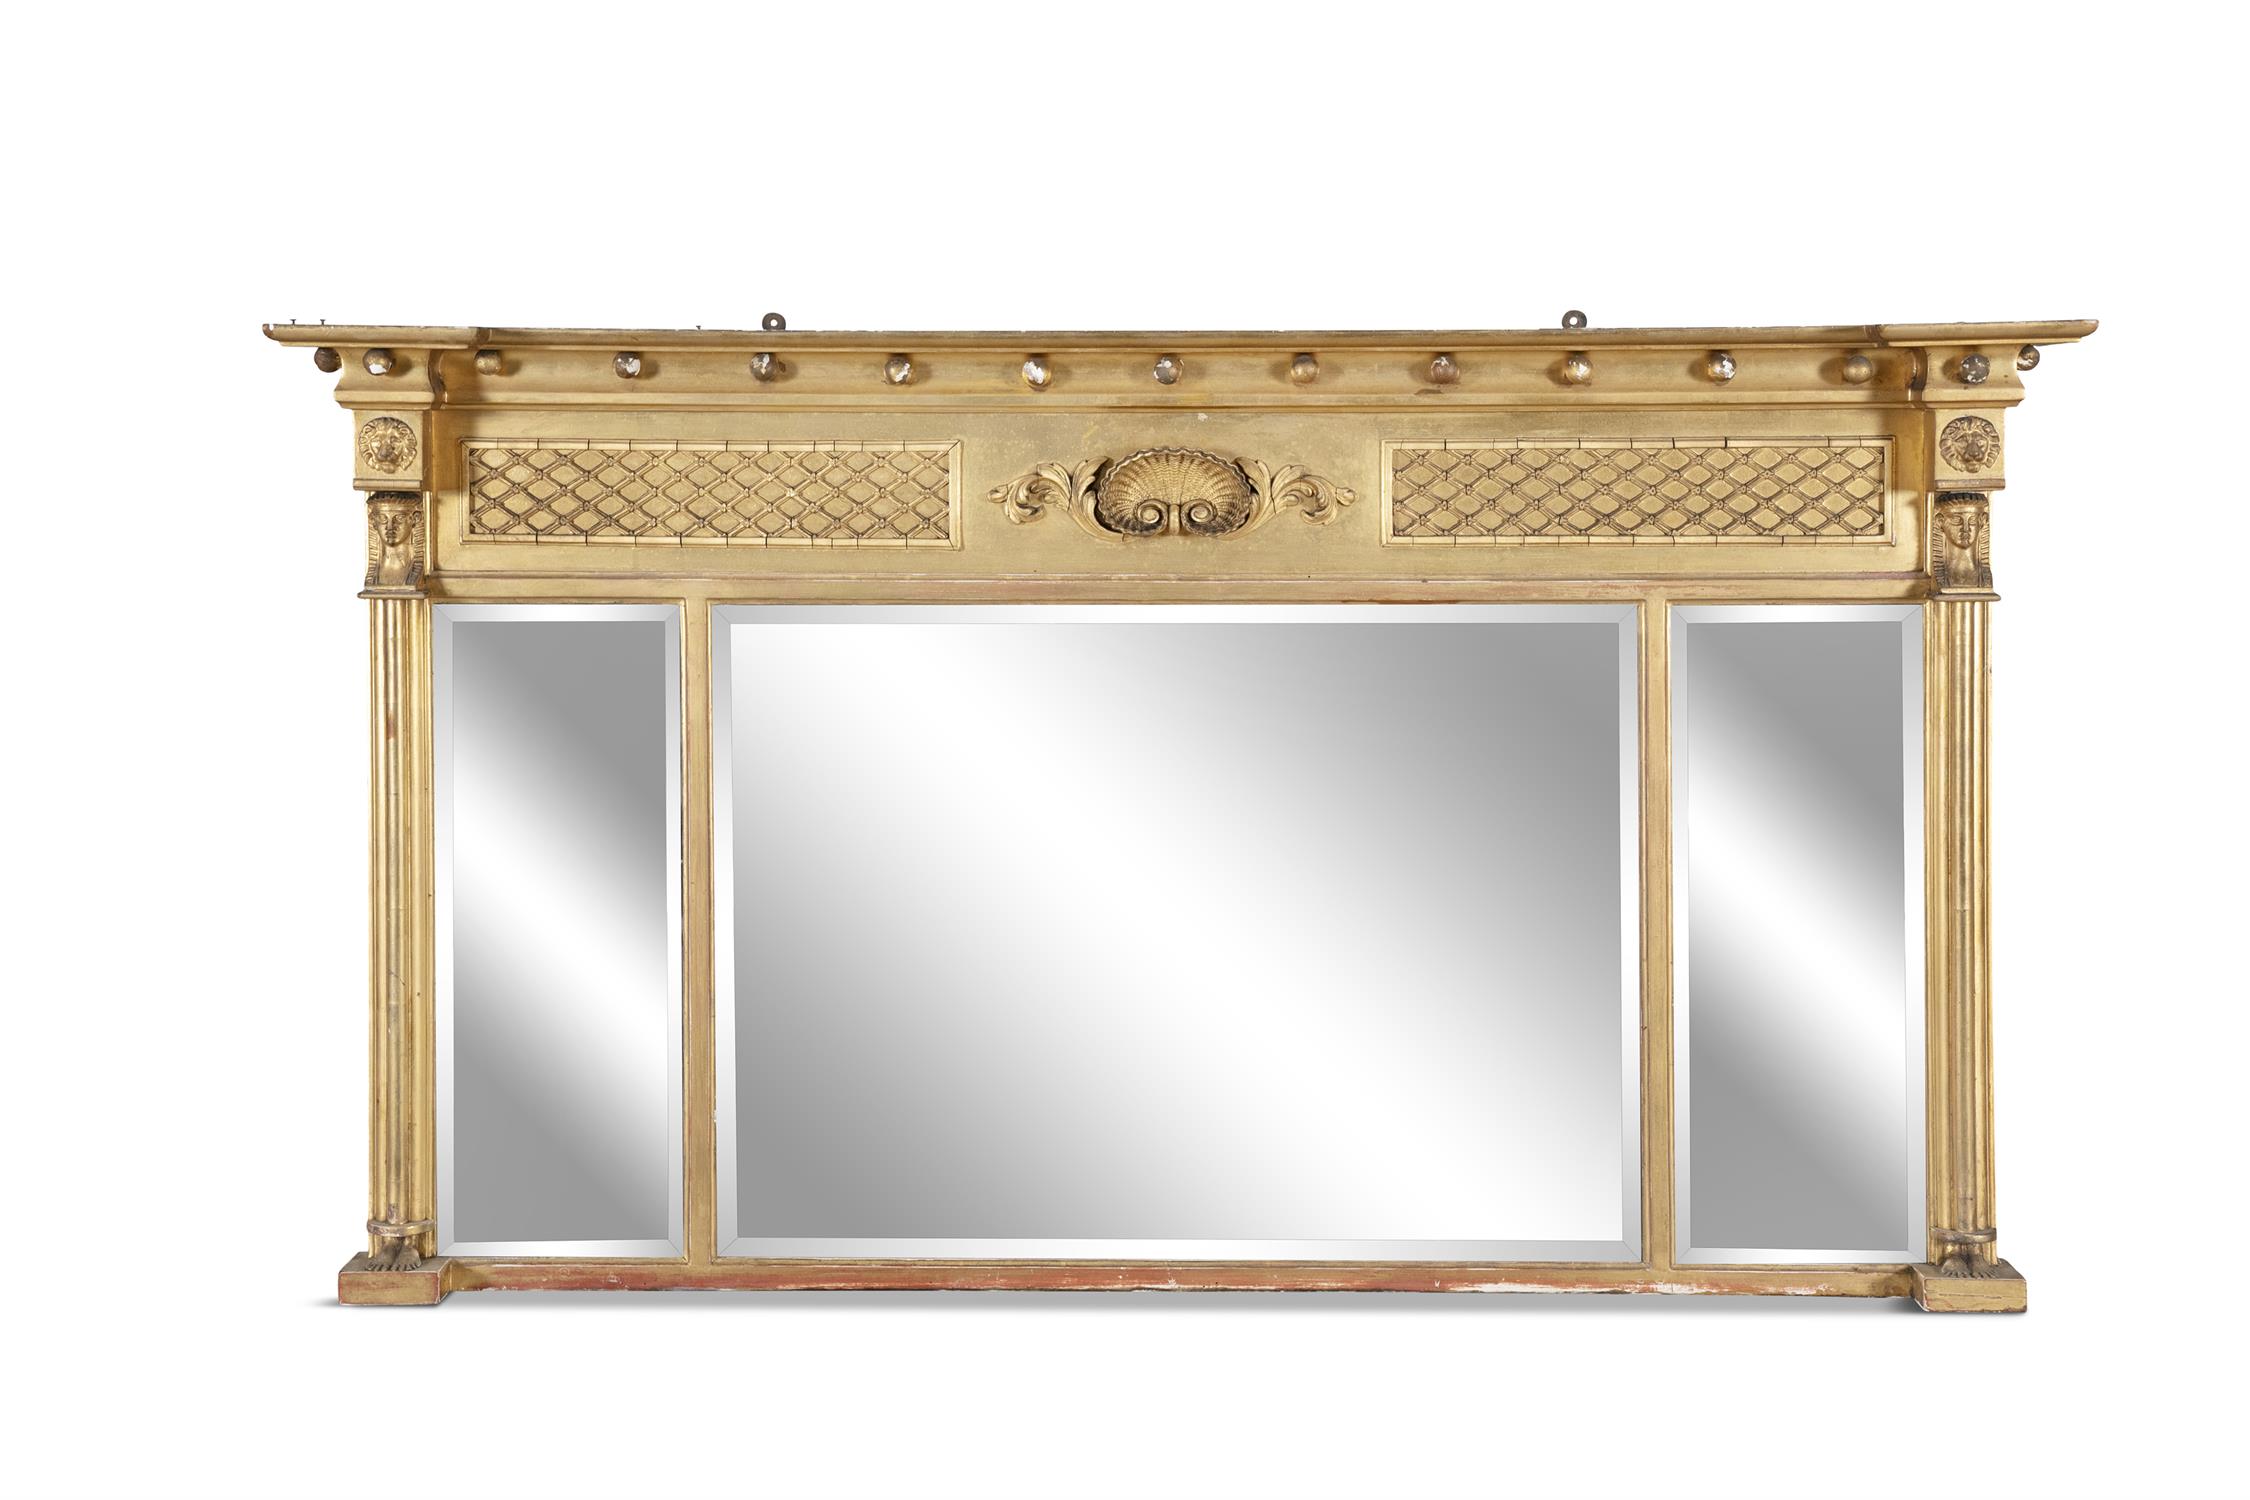 A GILTWOOD COMPARTMENTED OVERMANTLE MIRROR, 19th century, of rectangular form, with shell and